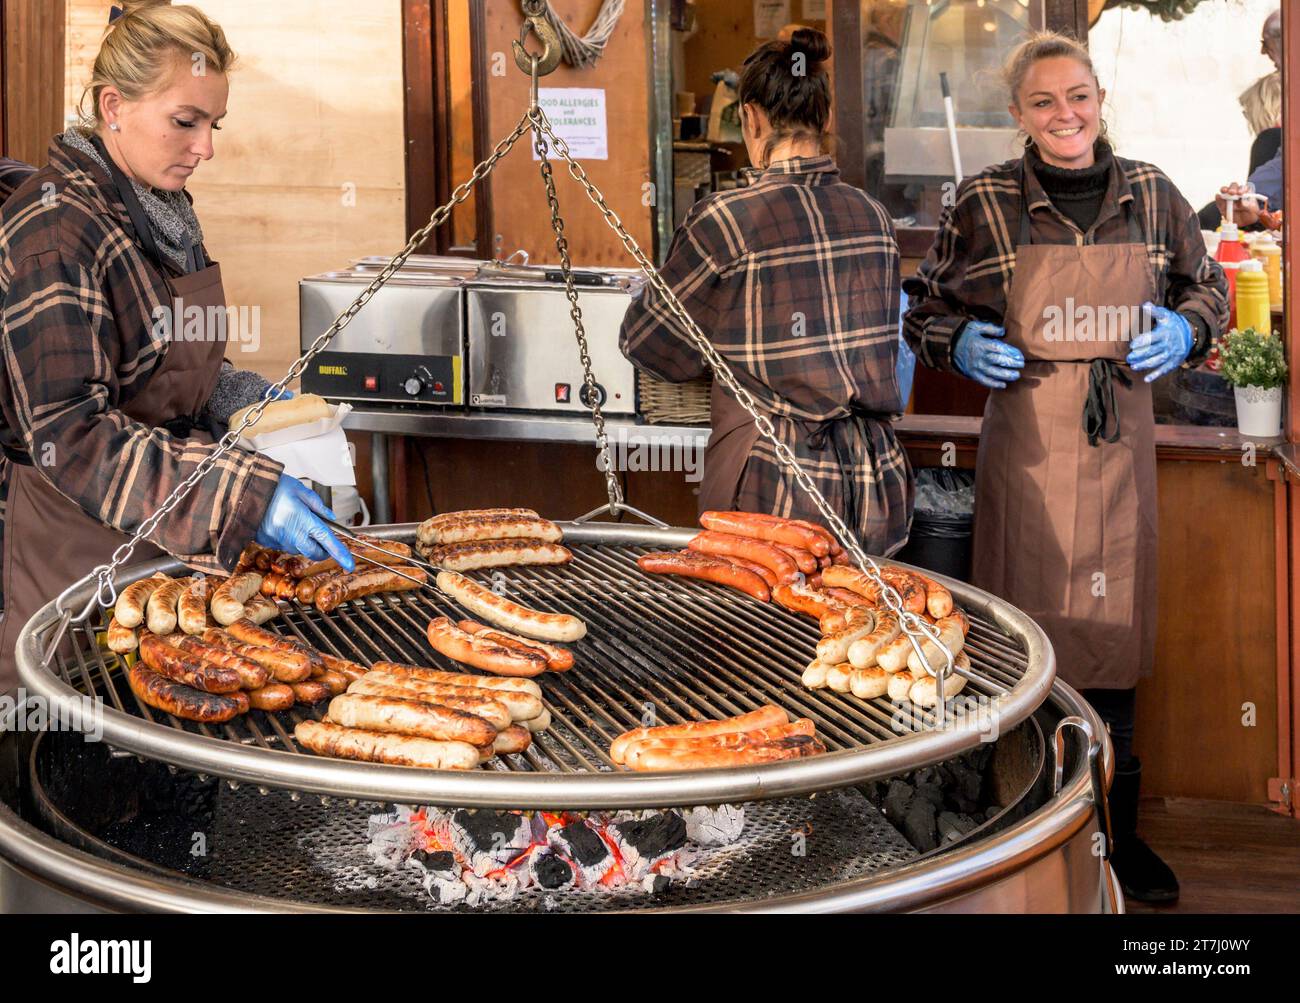 London, UK. German sausages being cooked in Trafalgar Square by the German Sausage Company, in the Christmas Market in front of the National Gallery, Stock Photo